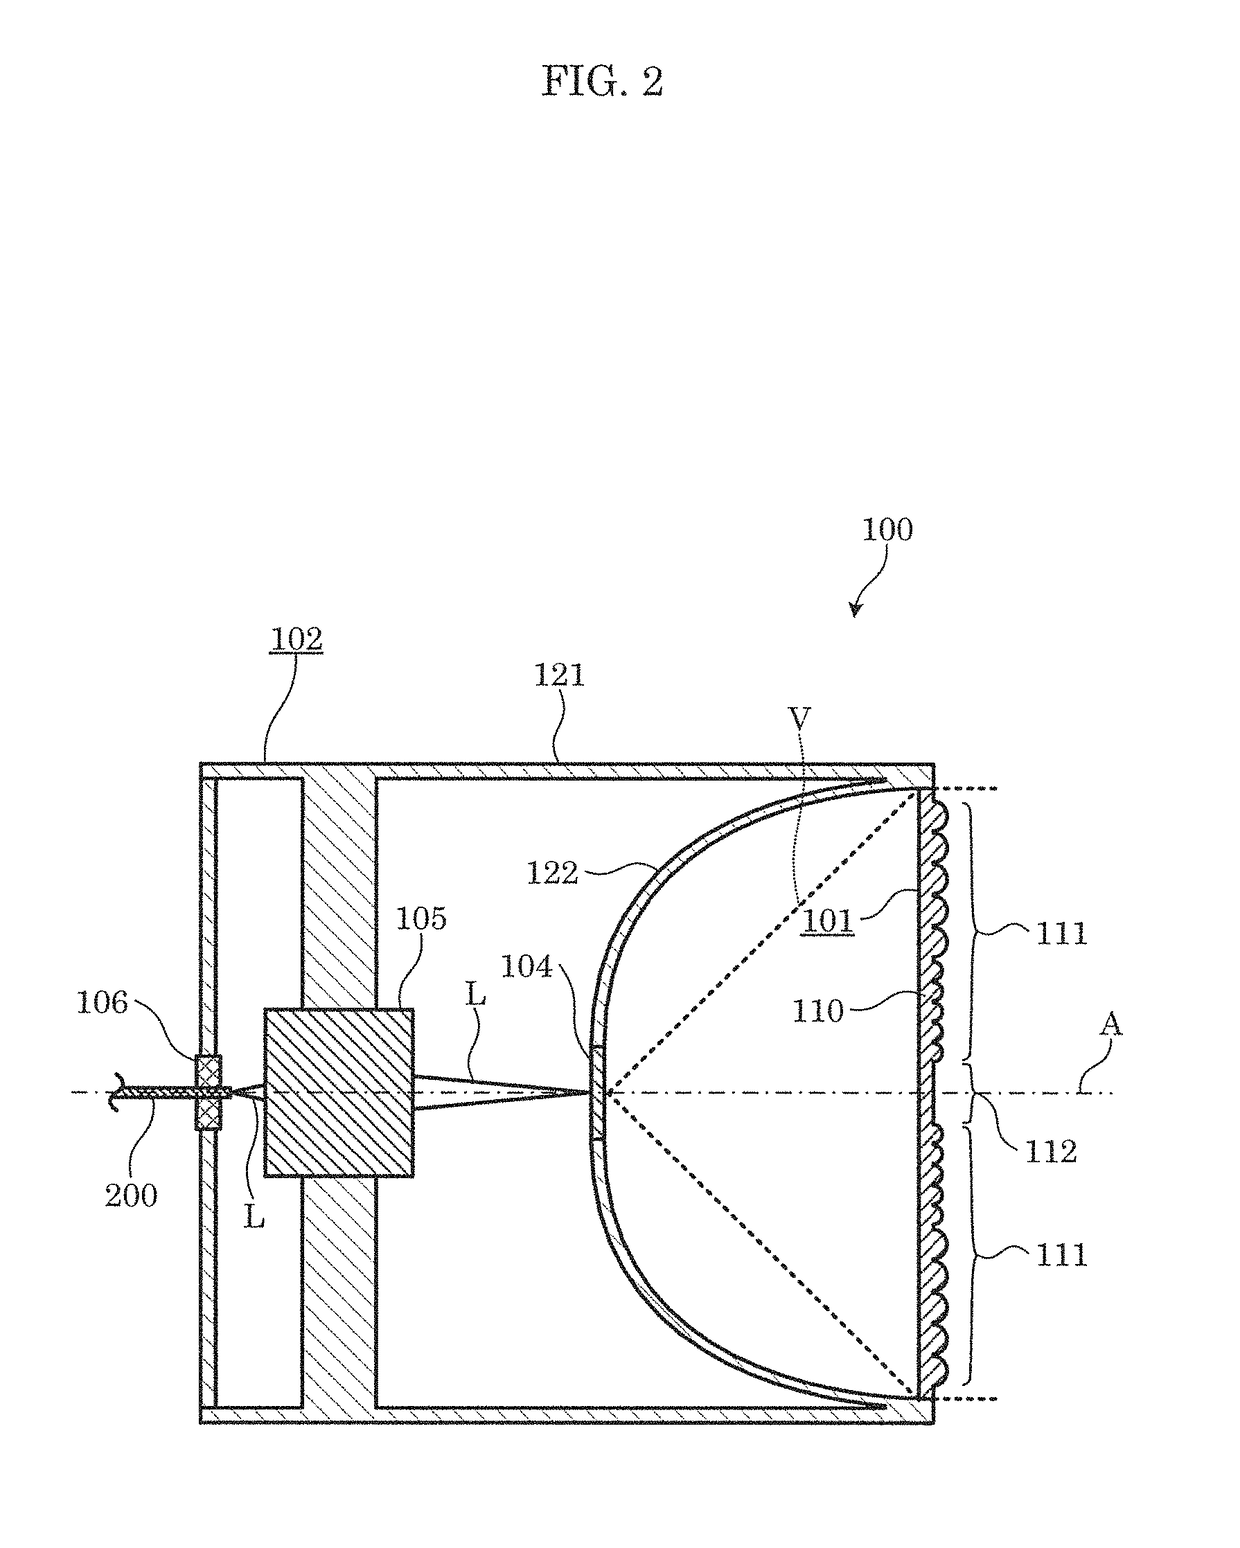 Lighting apparatus that utilizes honey-comb structured optical component to reduce light unevenness while maintaining light transmissivity in the irradiation region